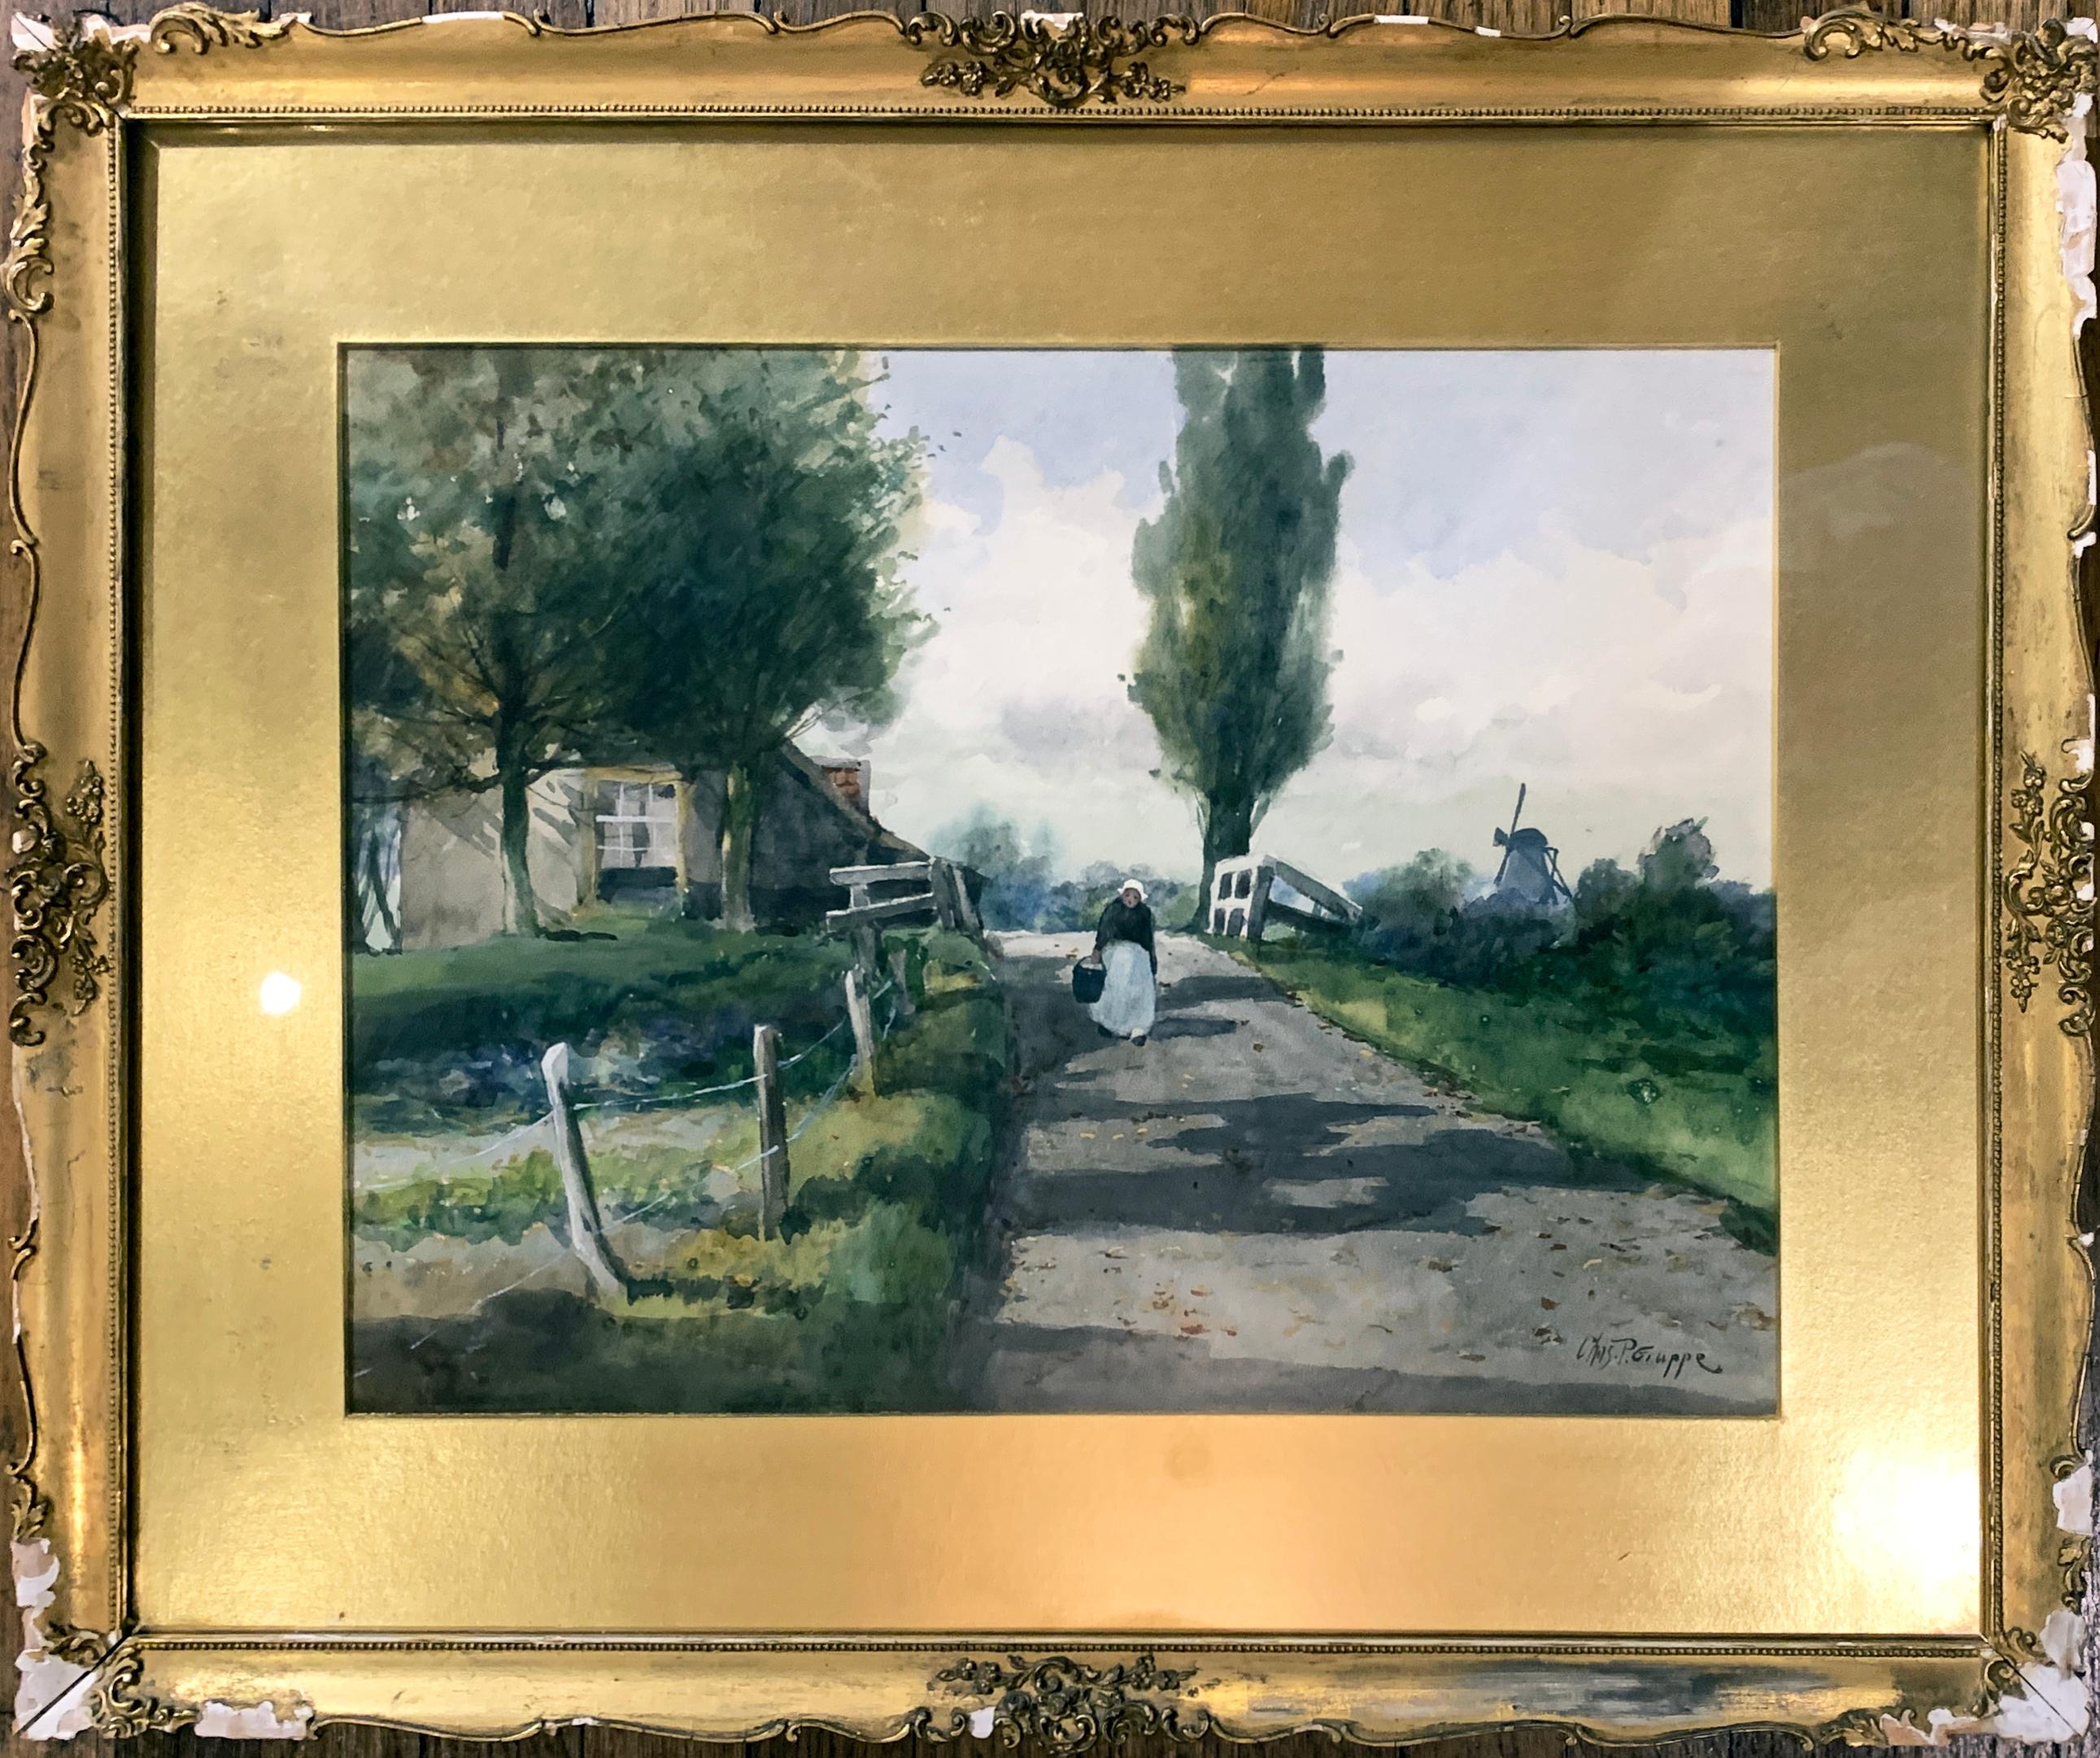 Dutch Landscape Watercolor Painting by the popular well listed artist Charles Paul Gruppe (Canada, 1860 - 1940, New York City)  Dutch School, Circa 1898  Watercolor on Paper  Housed in a period gold gilt gesso wood frame, matted gold gilt and framed